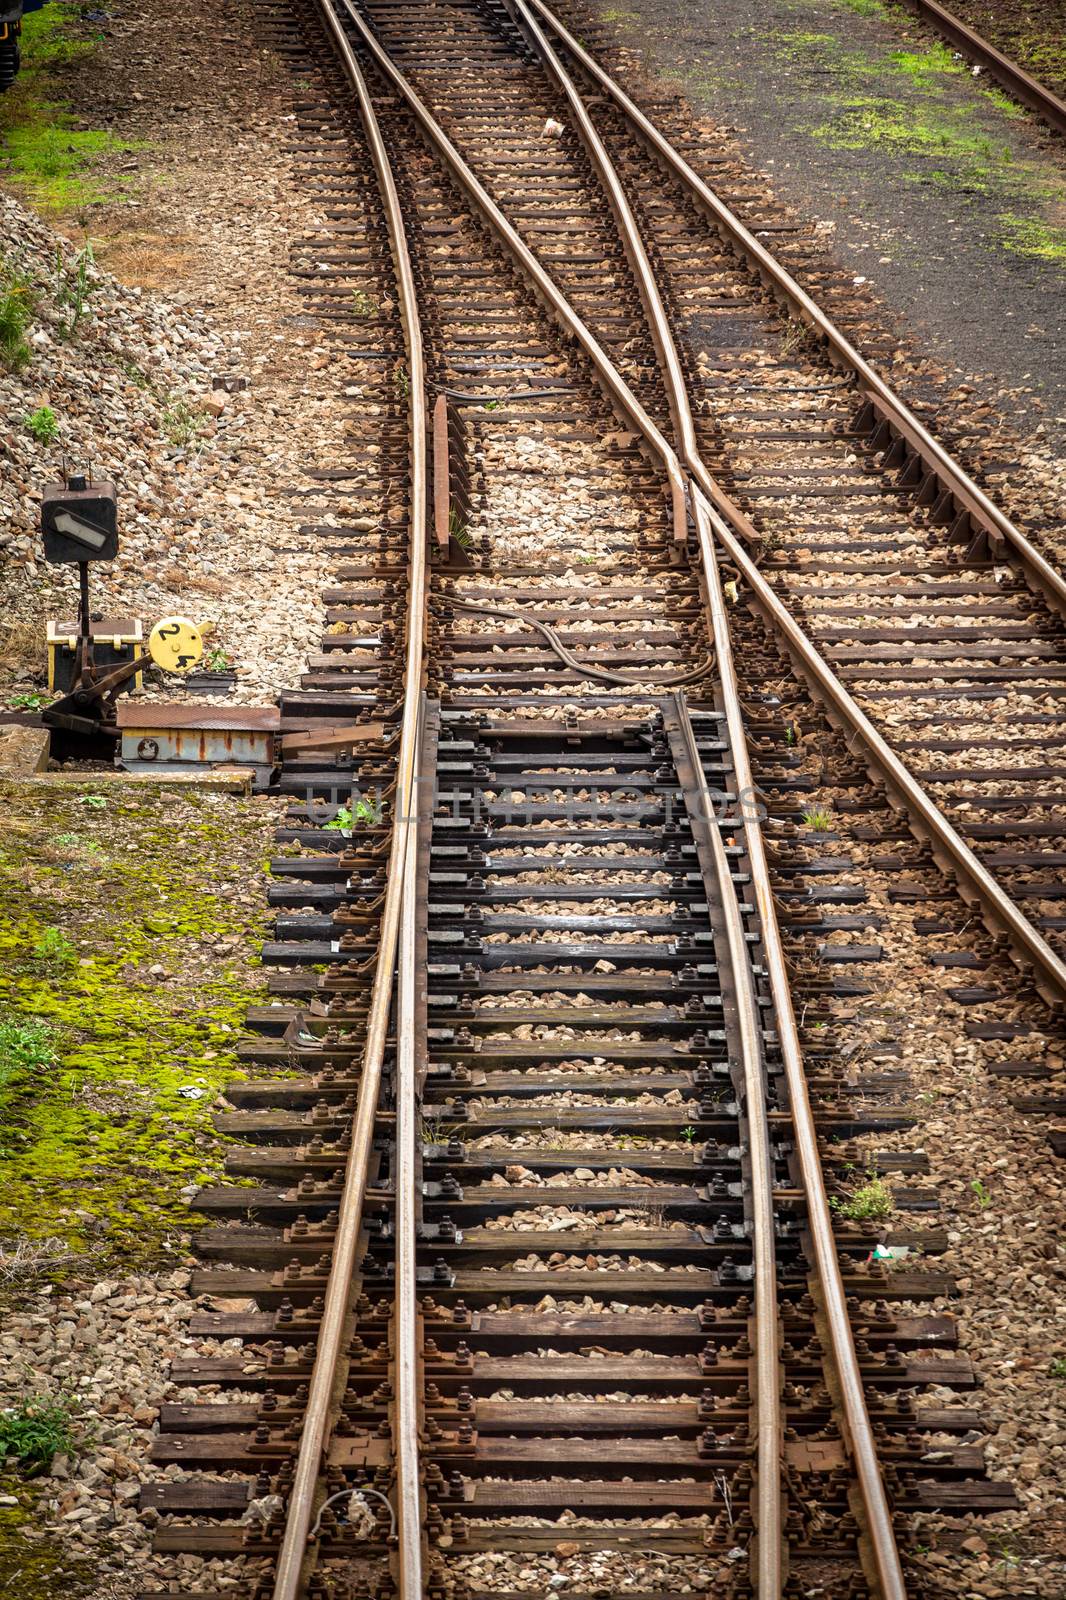 Close up view of railway tracks